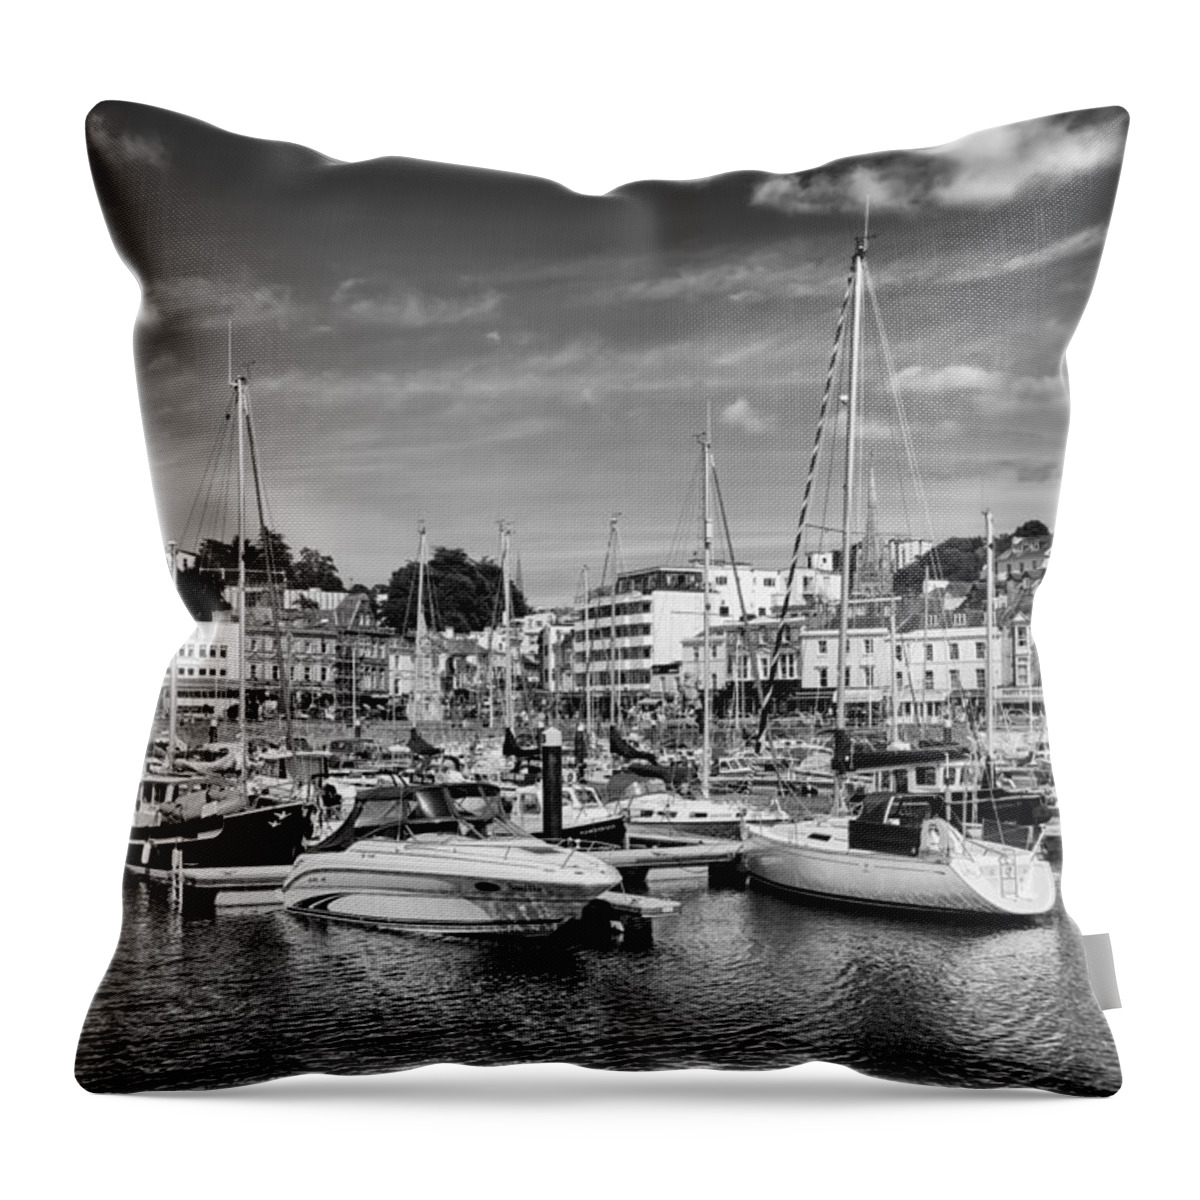  Throw Pillow featuring the photograph Torquay Marina #1 by Howard Salmon